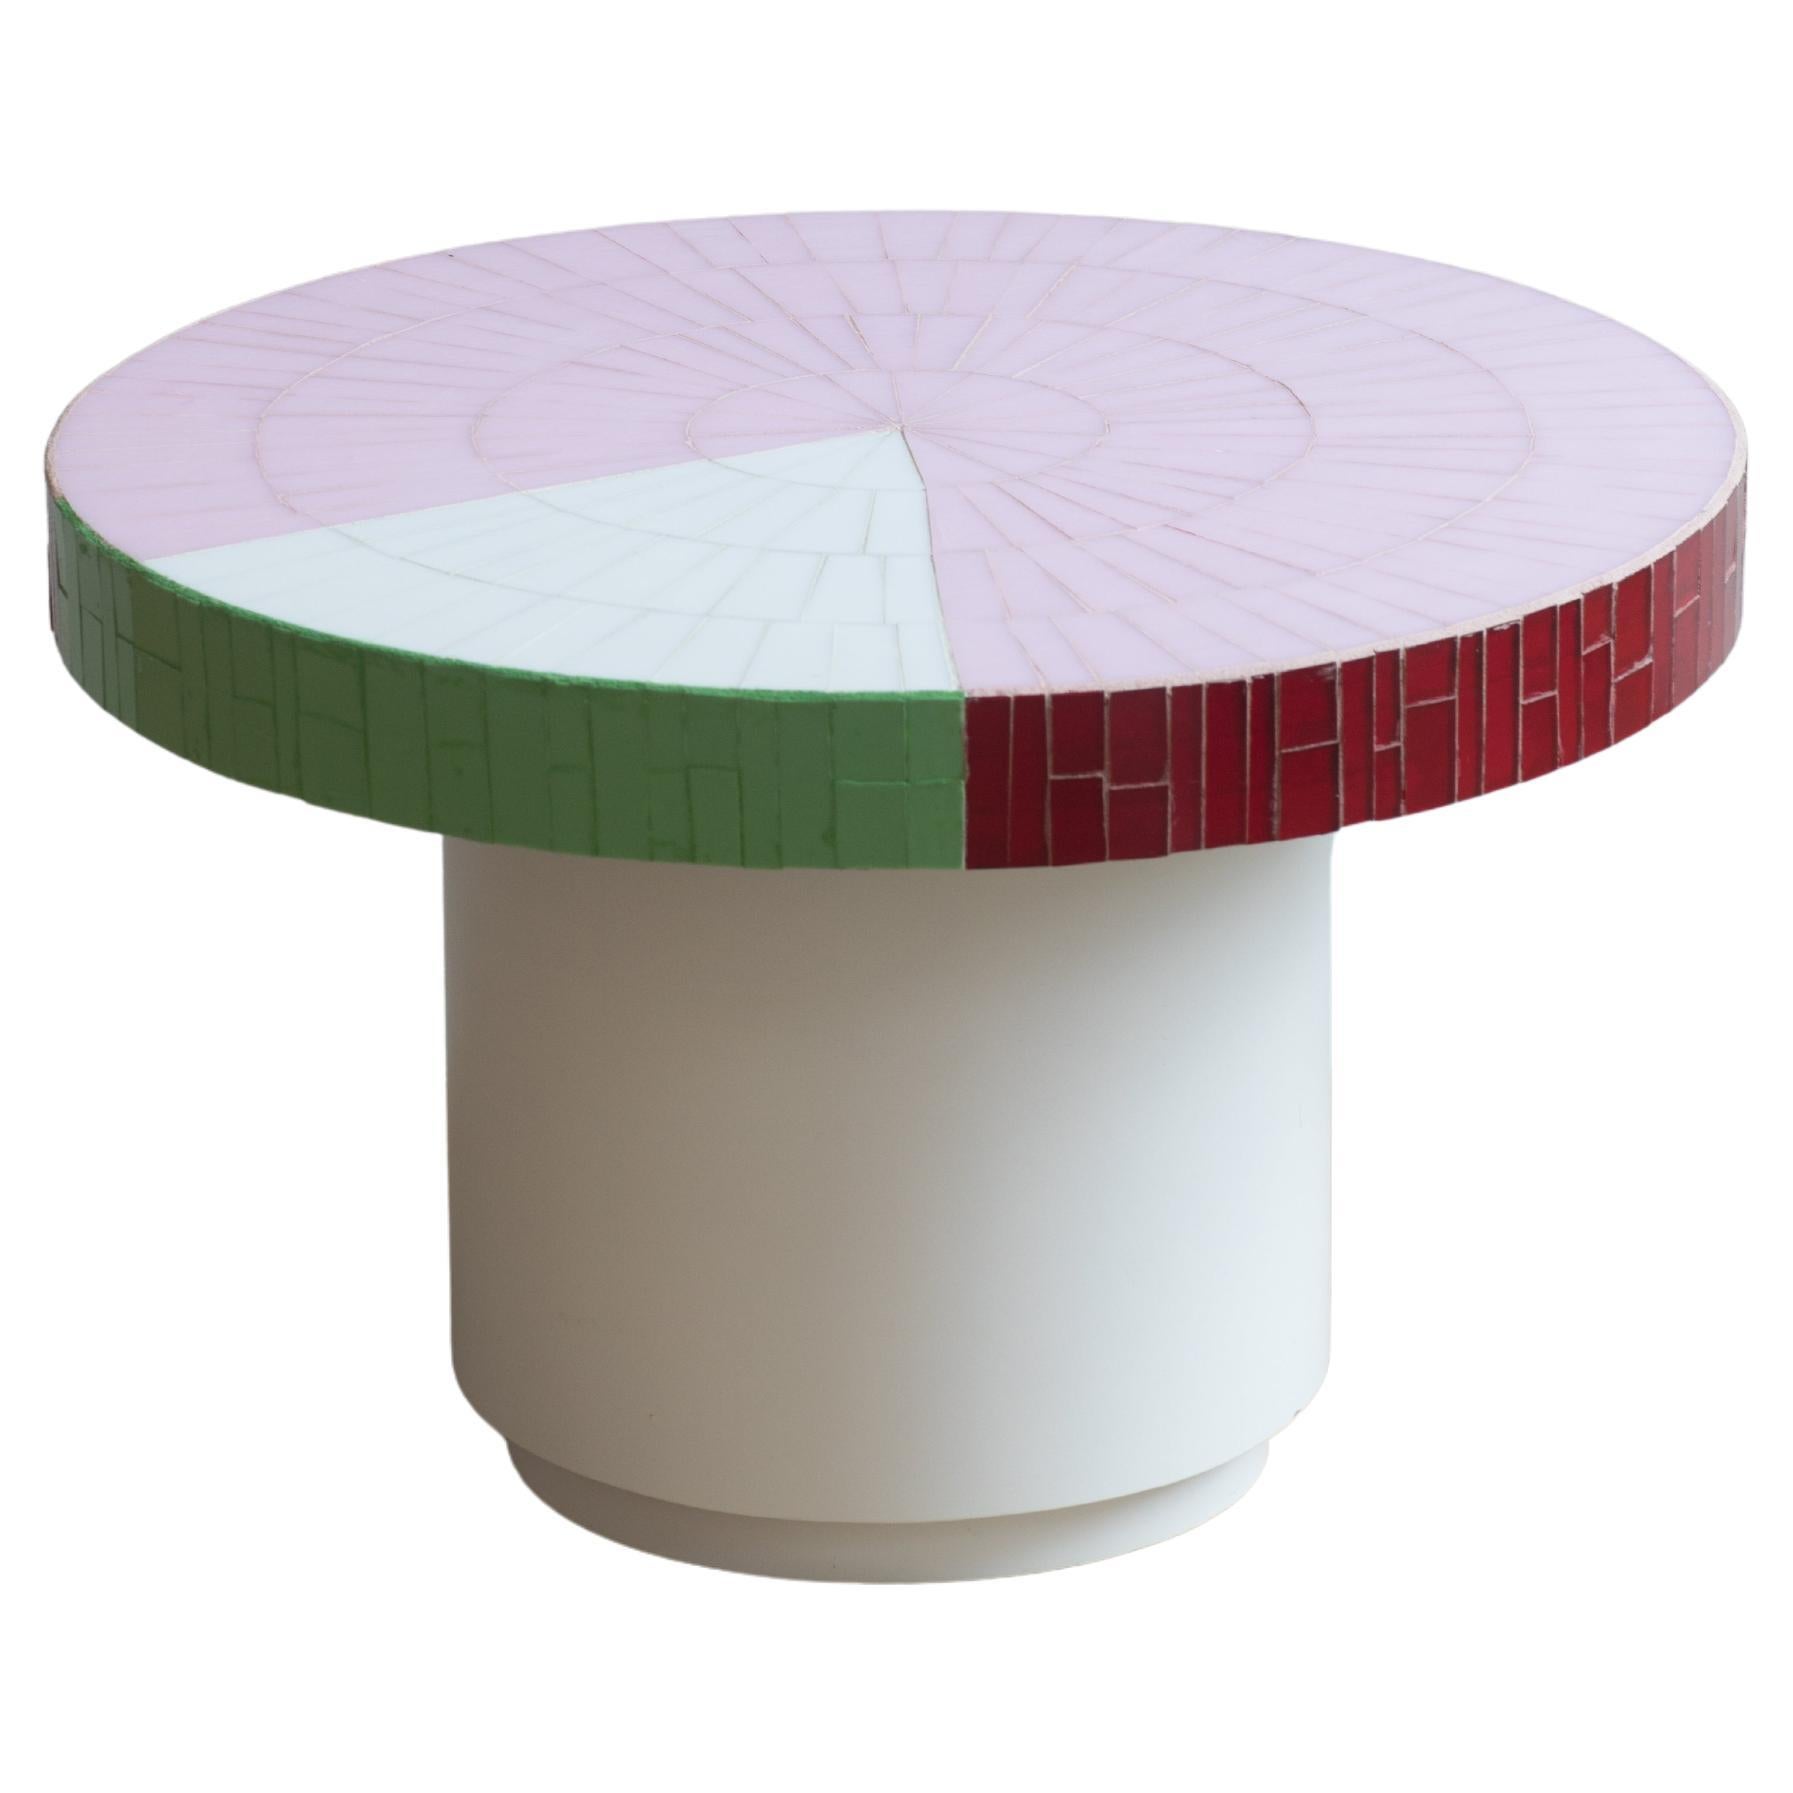 Table basse The Modernity Color Block